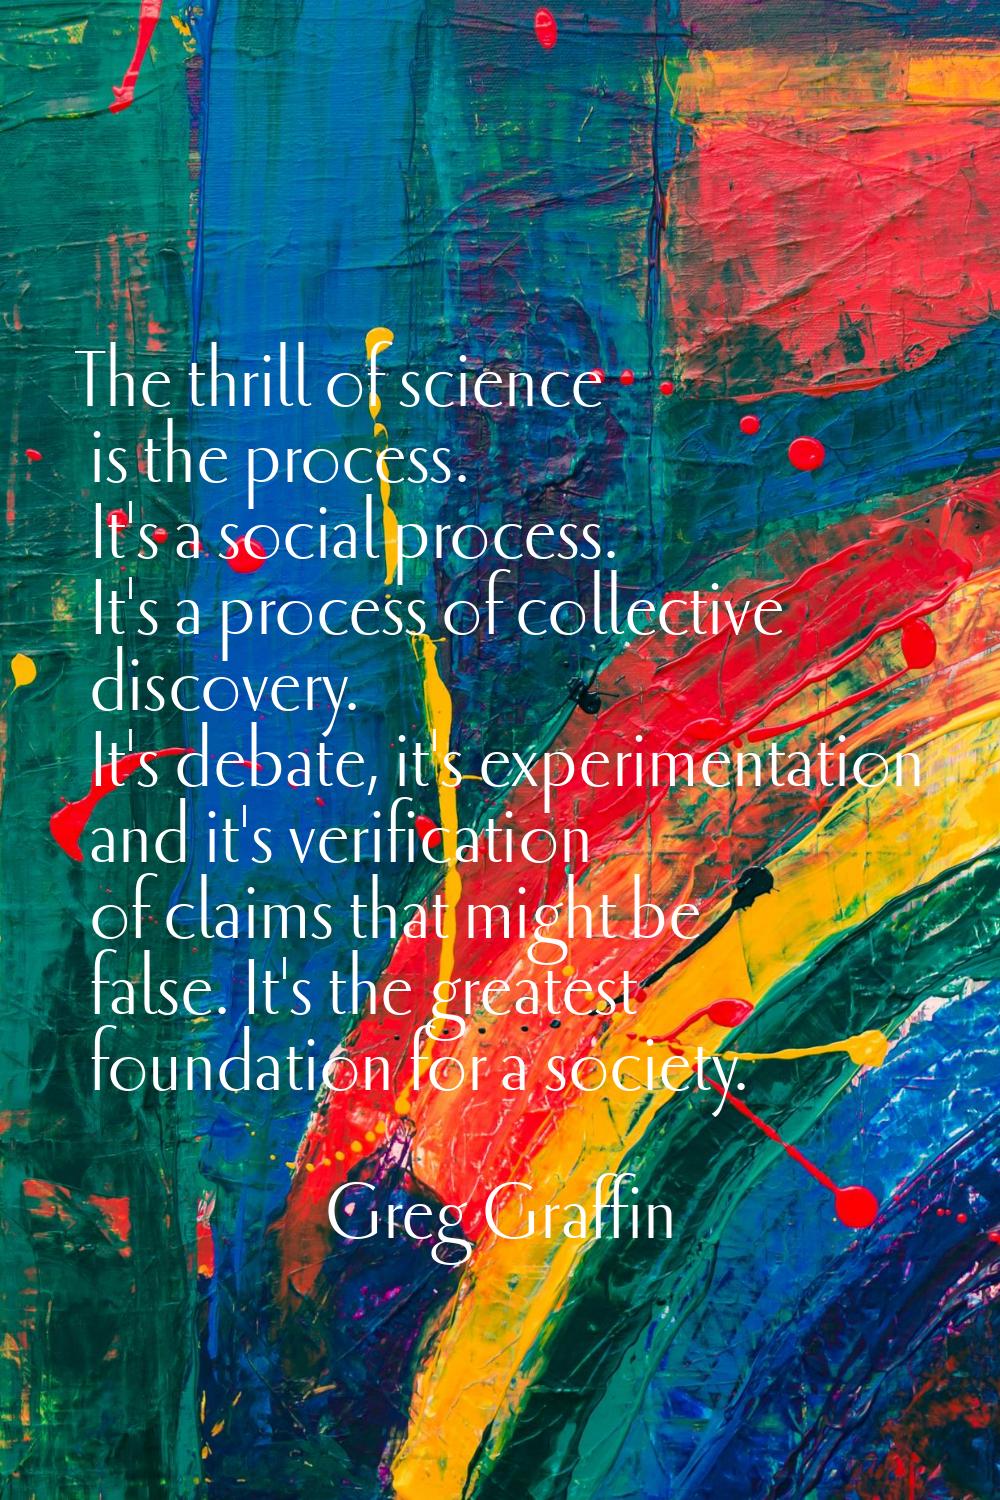 The thrill of science is the process. It's a social process. It's a process of collective discovery